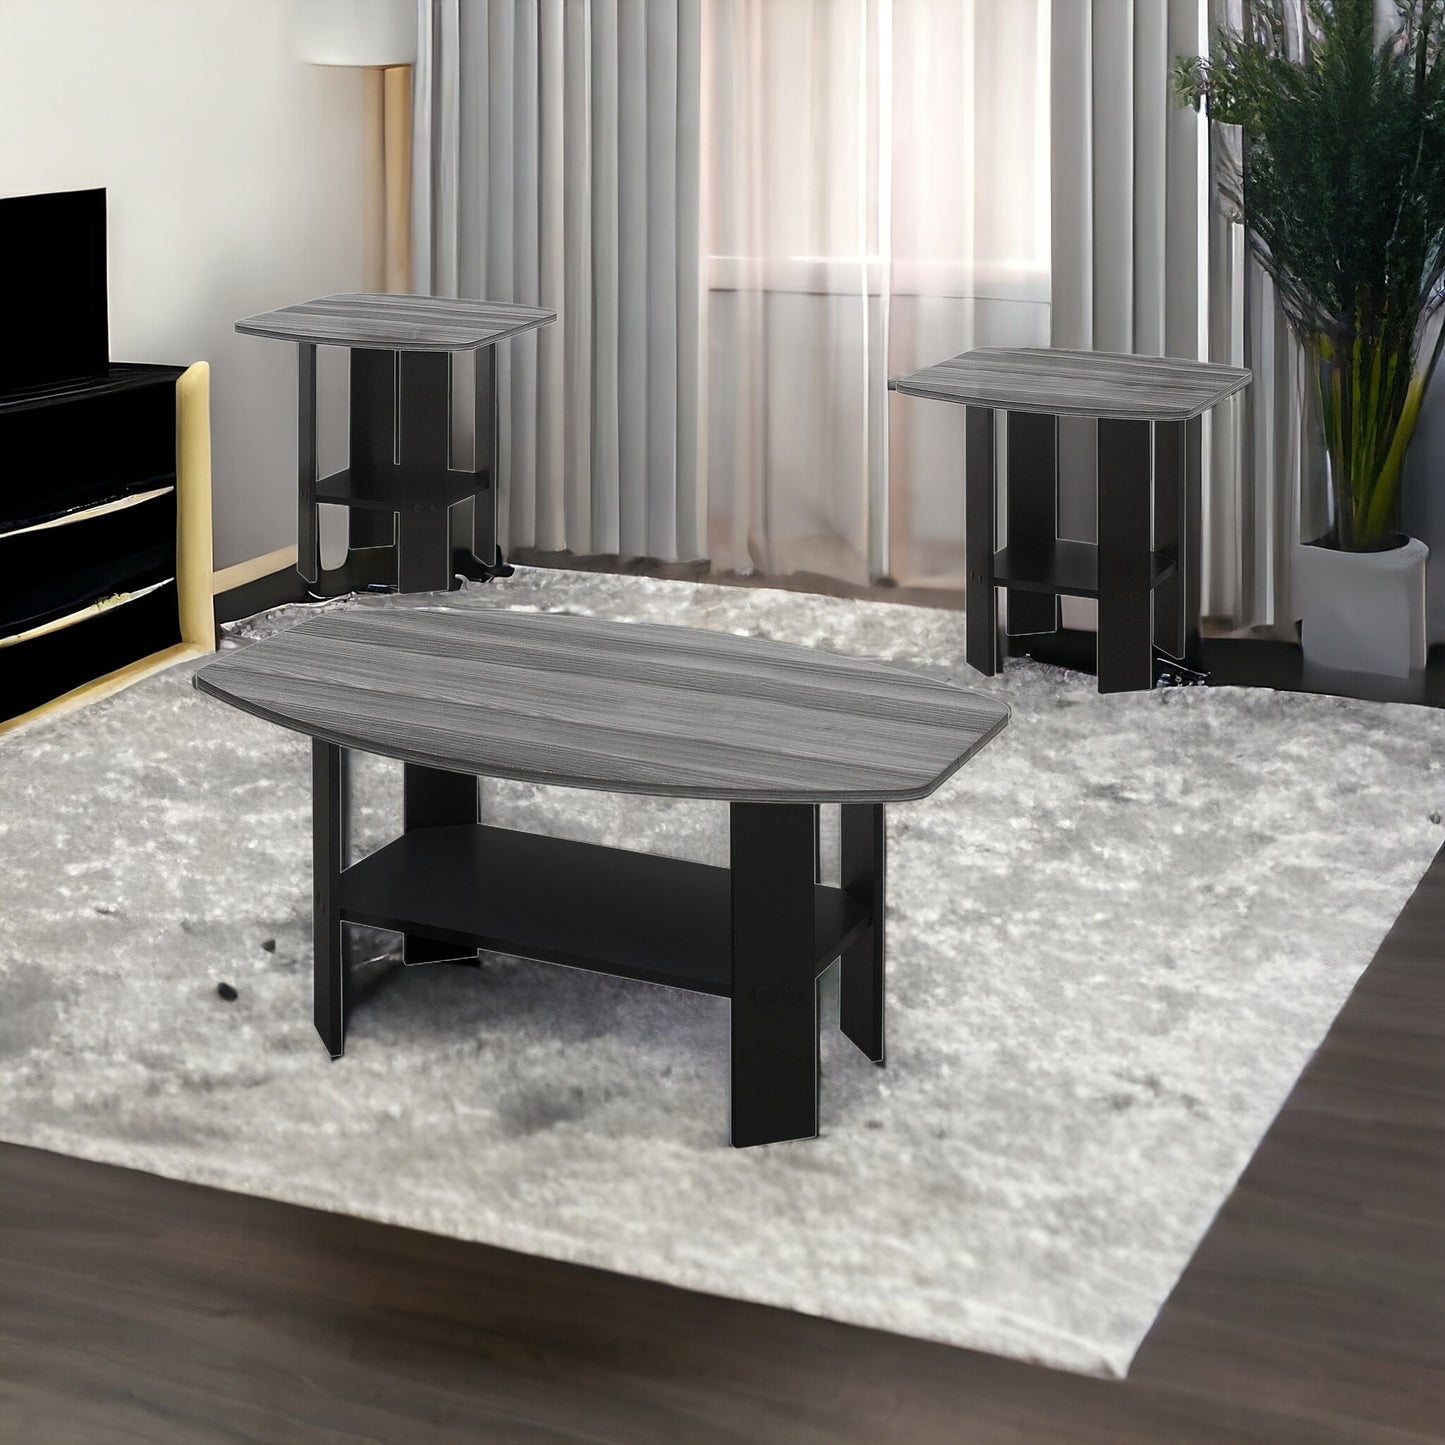 Set of Three 36" Gray And Black Coffee Table With Shelf